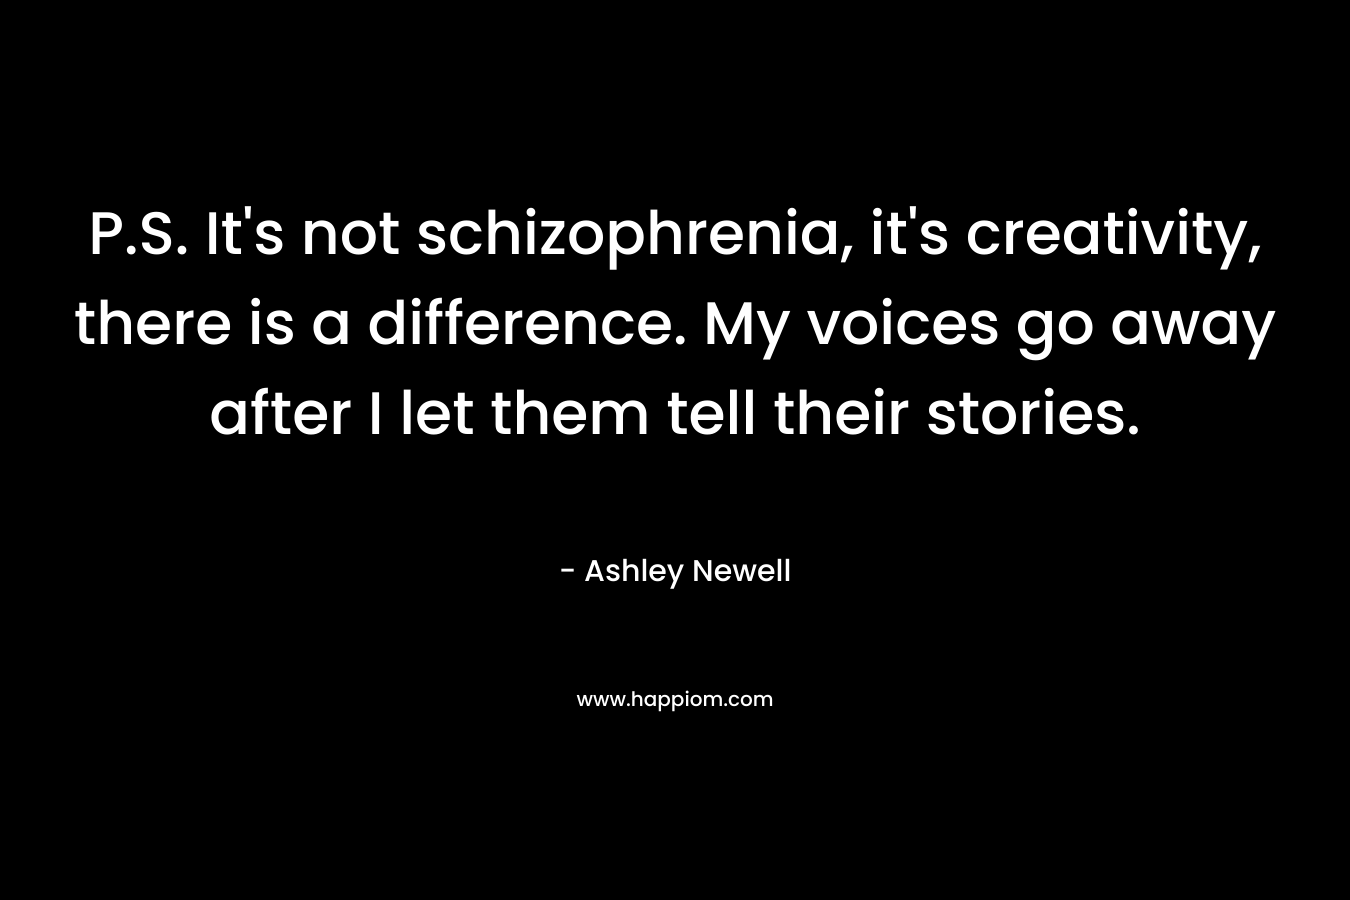 P.S. It’s not schizophrenia, it’s creativity, there is a difference. My voices go away after I let them tell their stories. – Ashley Newell